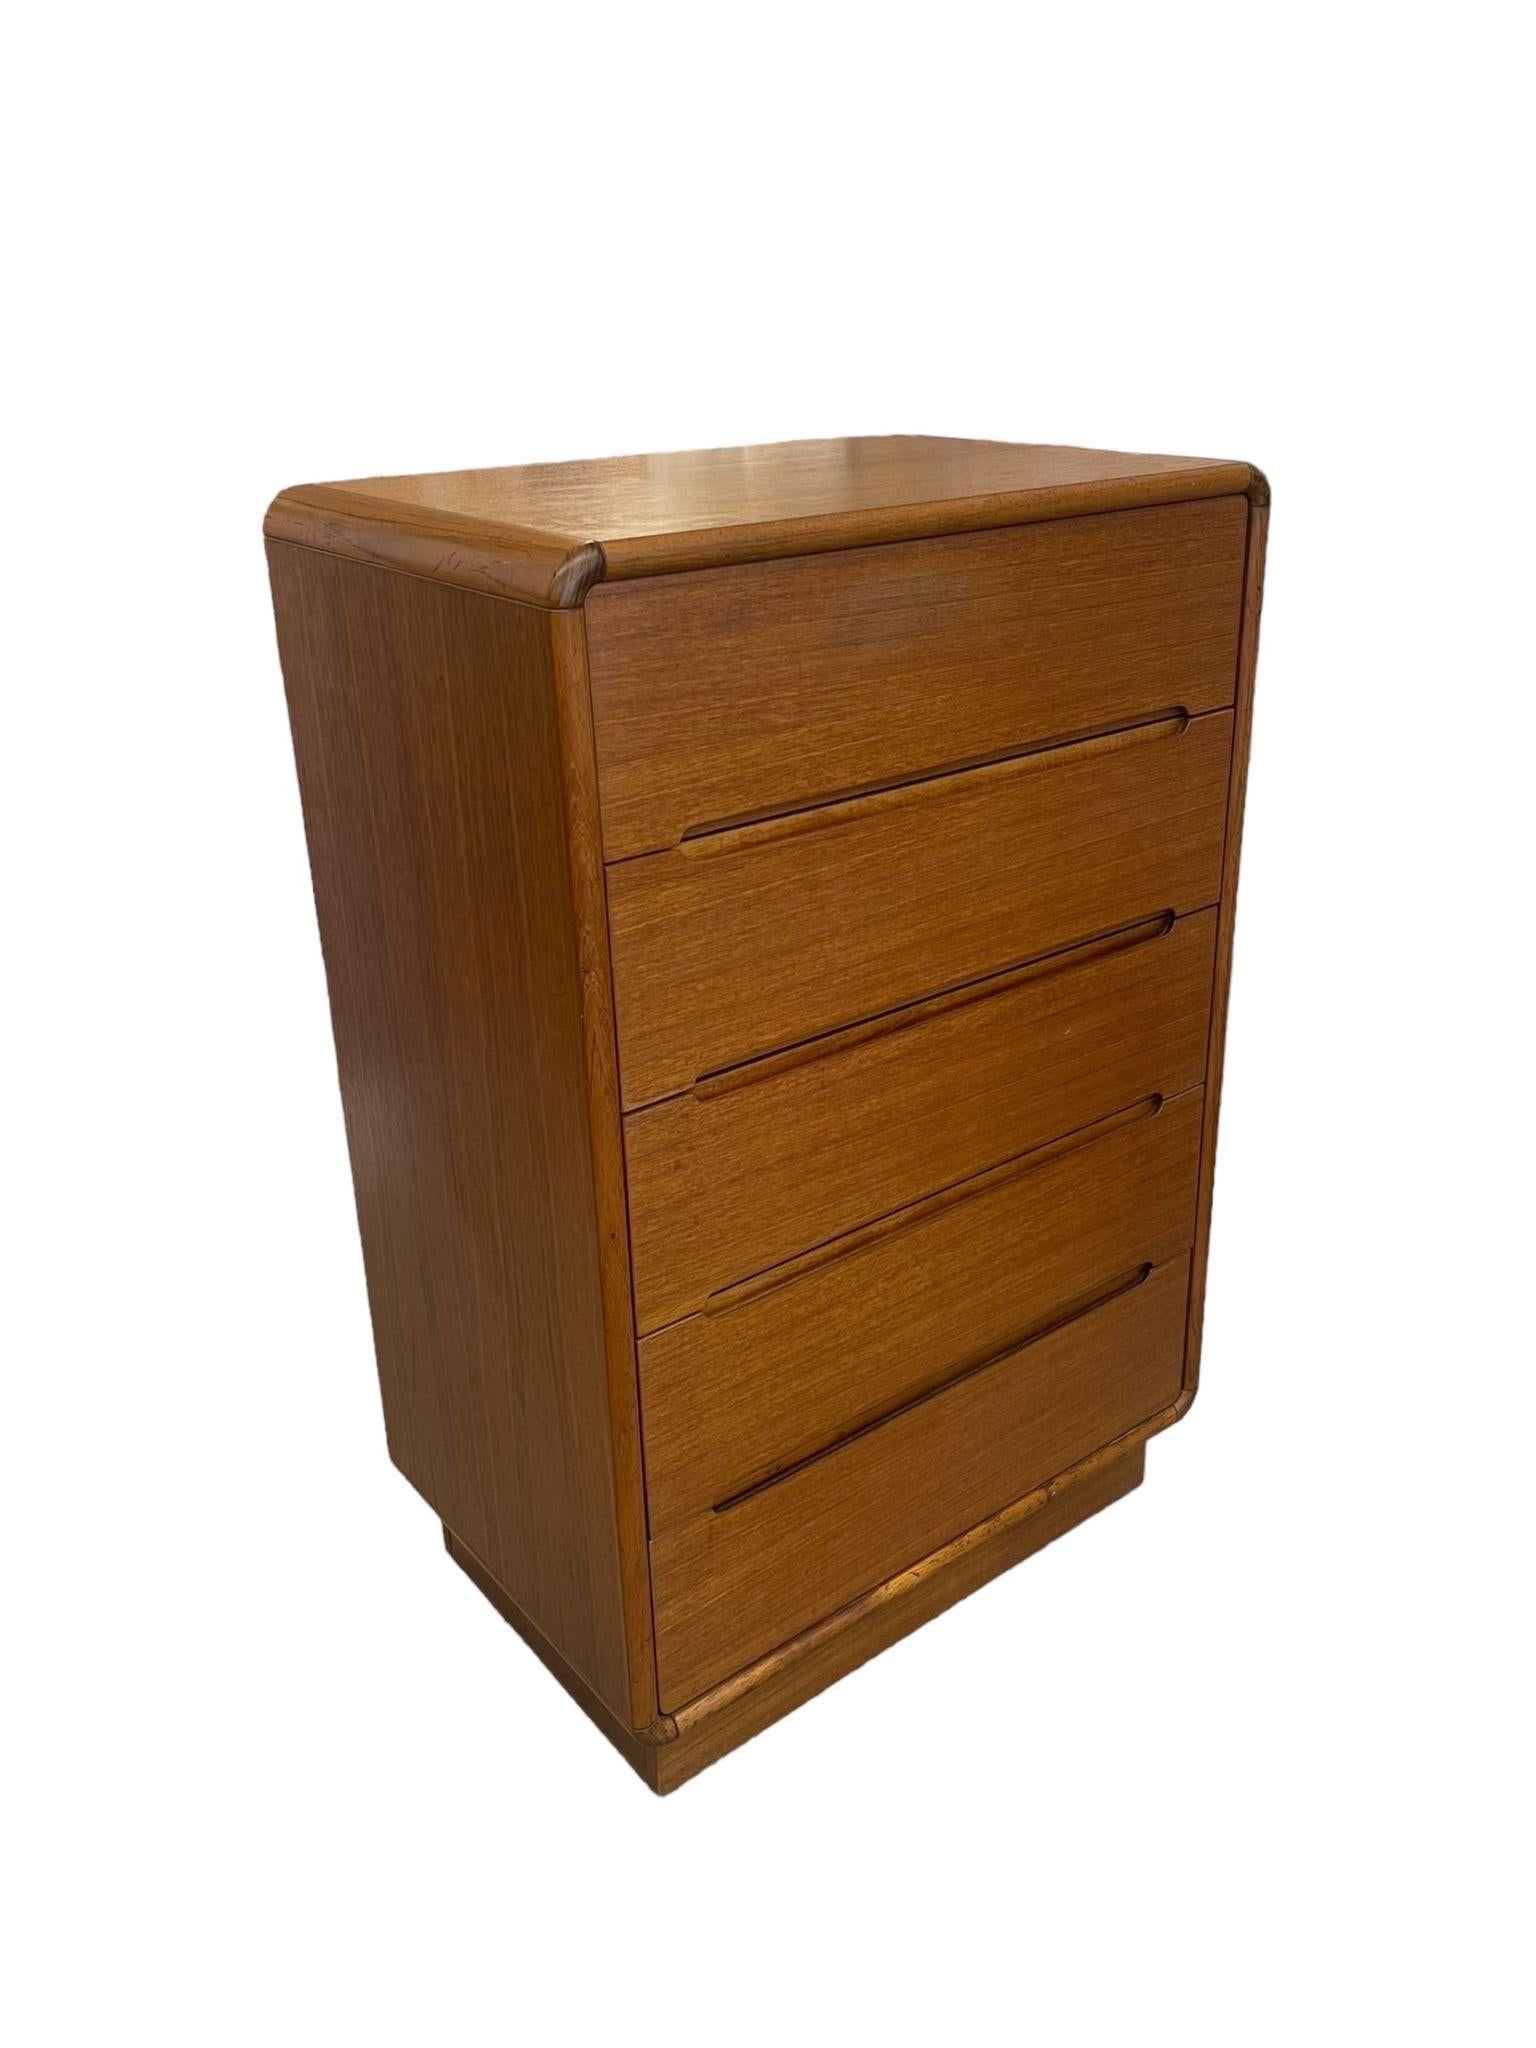 Mid Century Danish style dresser with smooth pulling drawers and petite size on platform base. Stunning wood grain, rounded edge design and finished backing. Crossgrain corner trim gives the wood a beautiful accent. Vintage Condition Consistent with